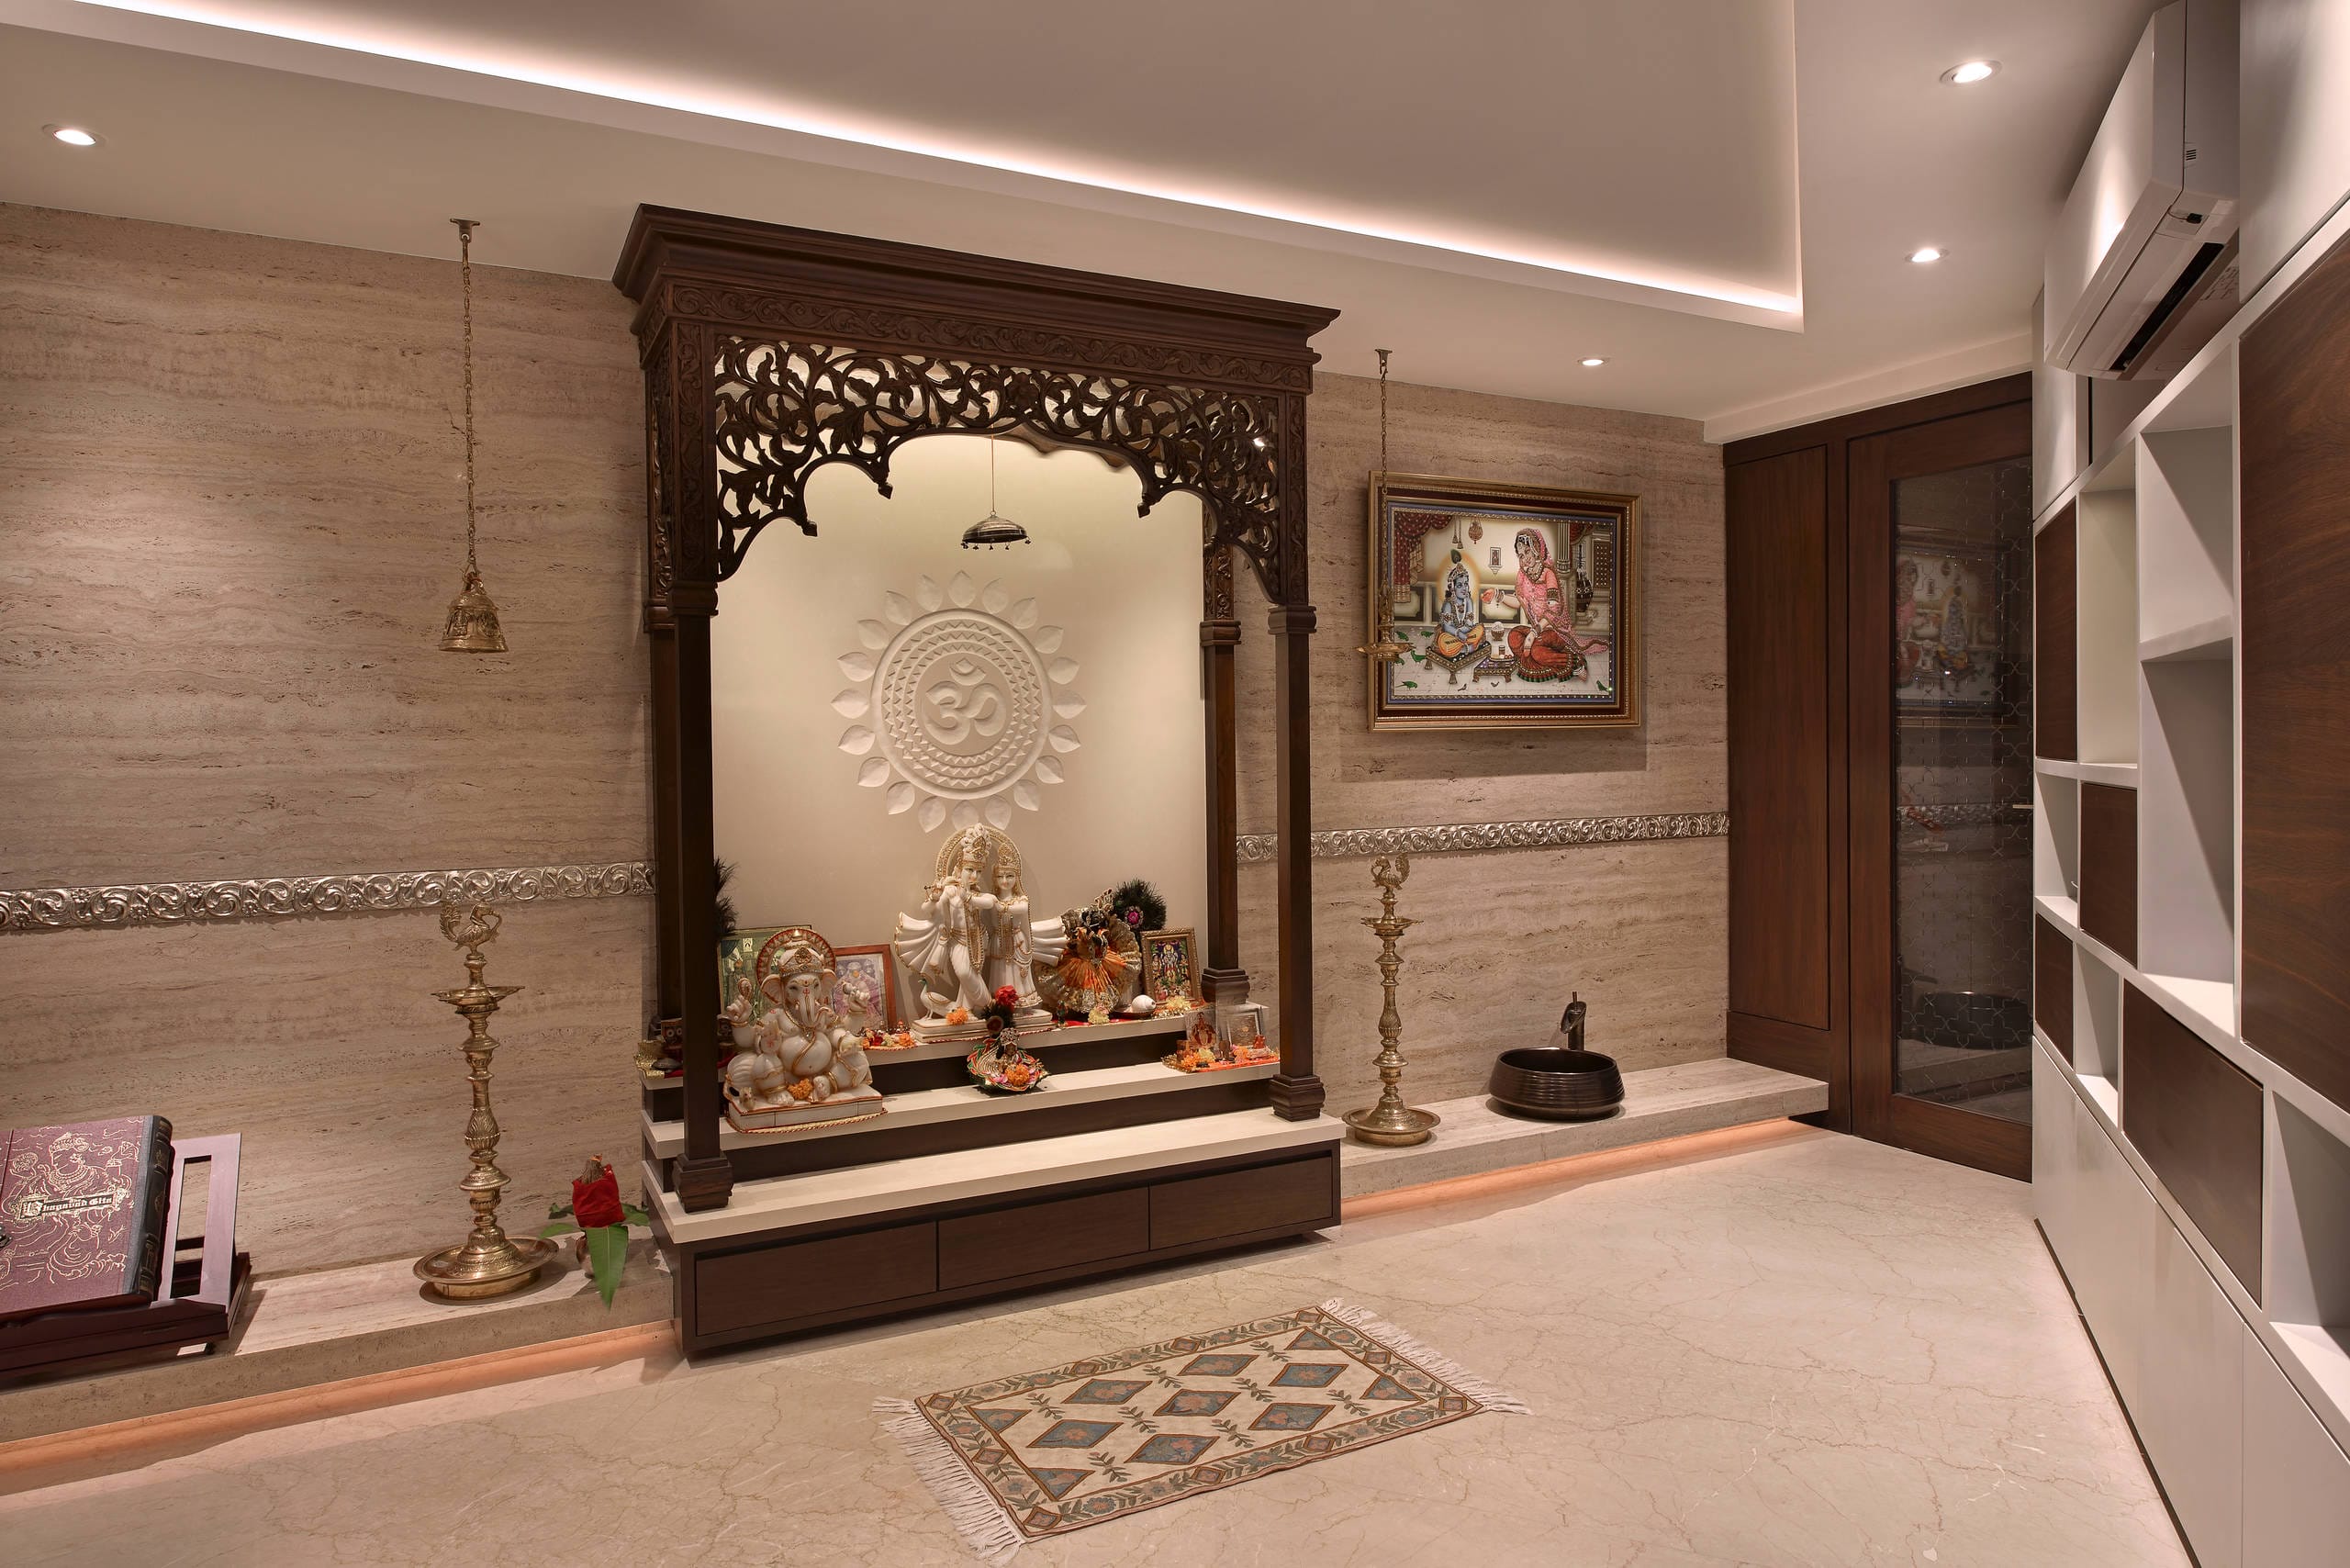 4bhk Apartment At Bkc Milind Pai Architects And Interior Designers Img D66180e60a5e01c2 14 5214 1 861acc2 